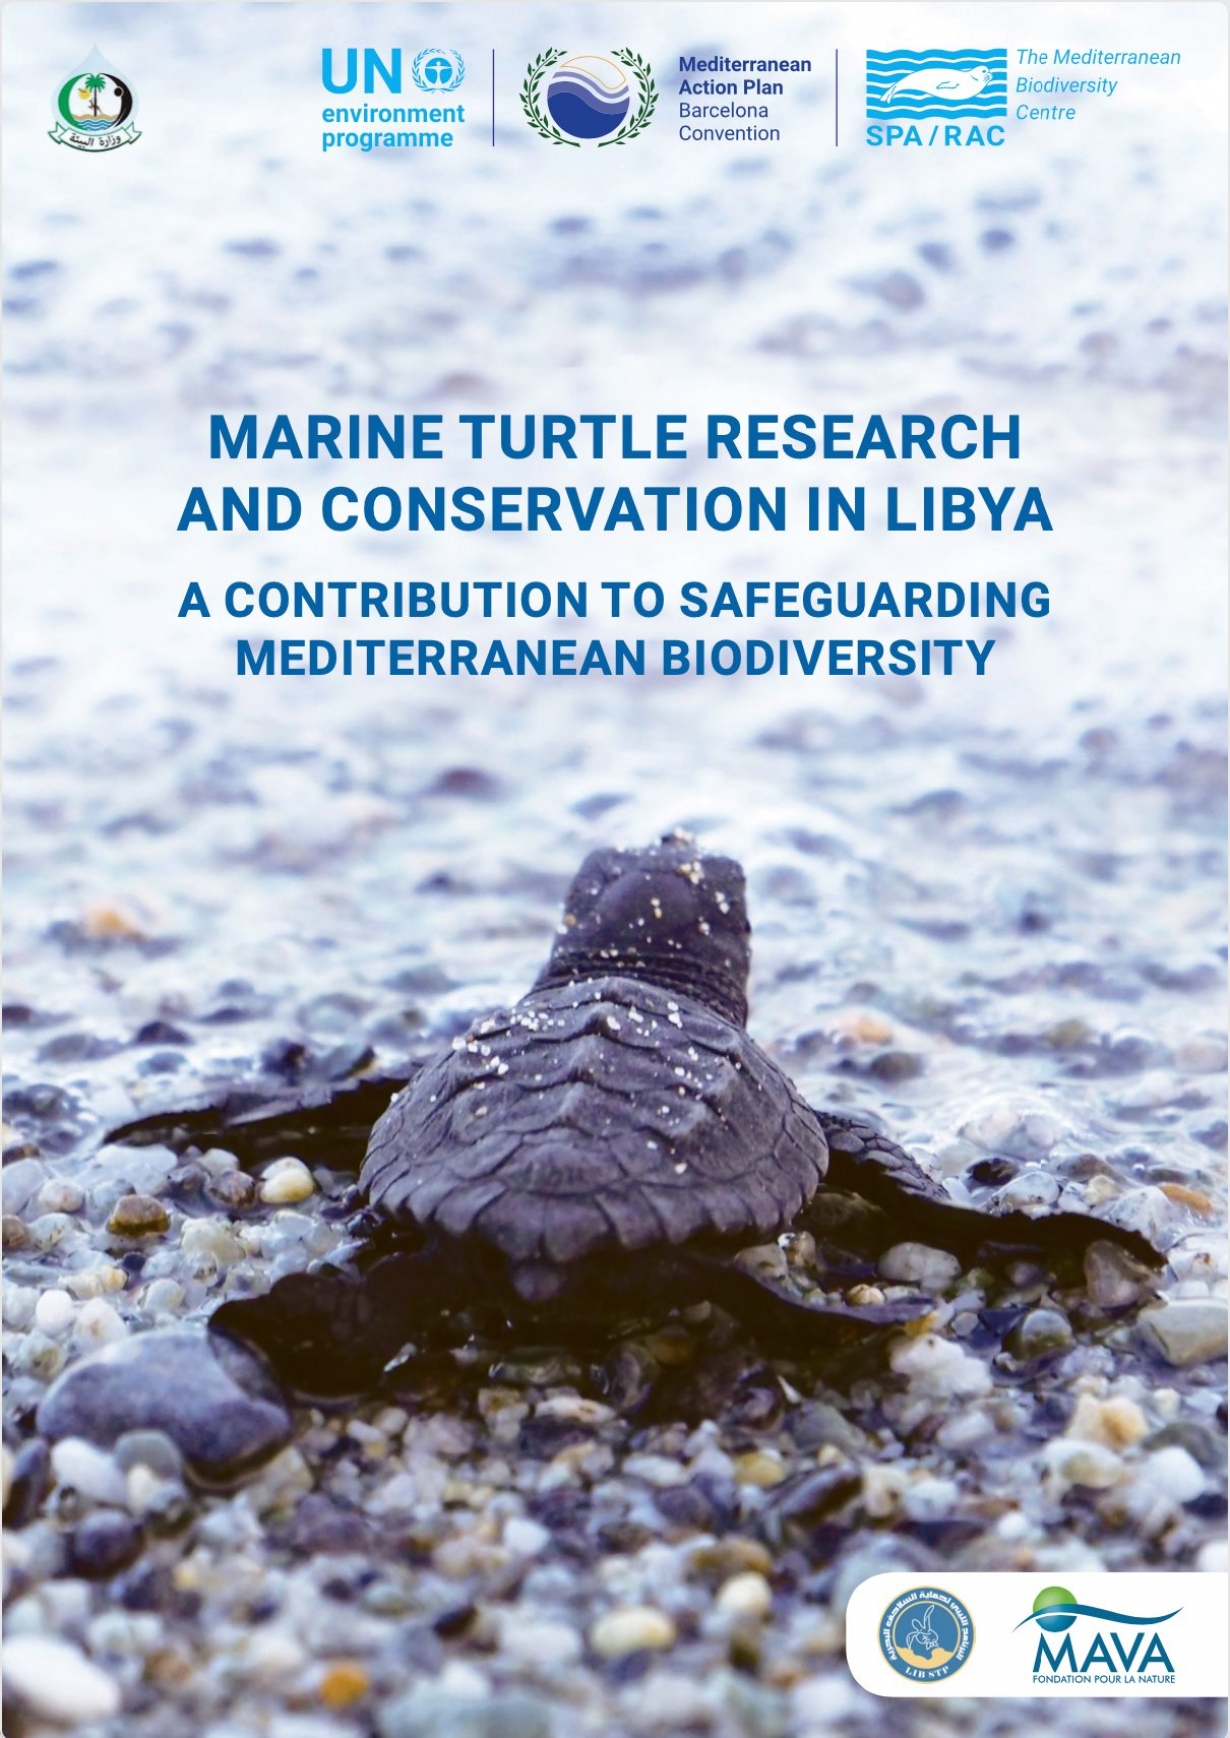 Marine Turtle Research and Conservation in Libya. A Contribution to Safeguarding Mediterranean Biodiversity.